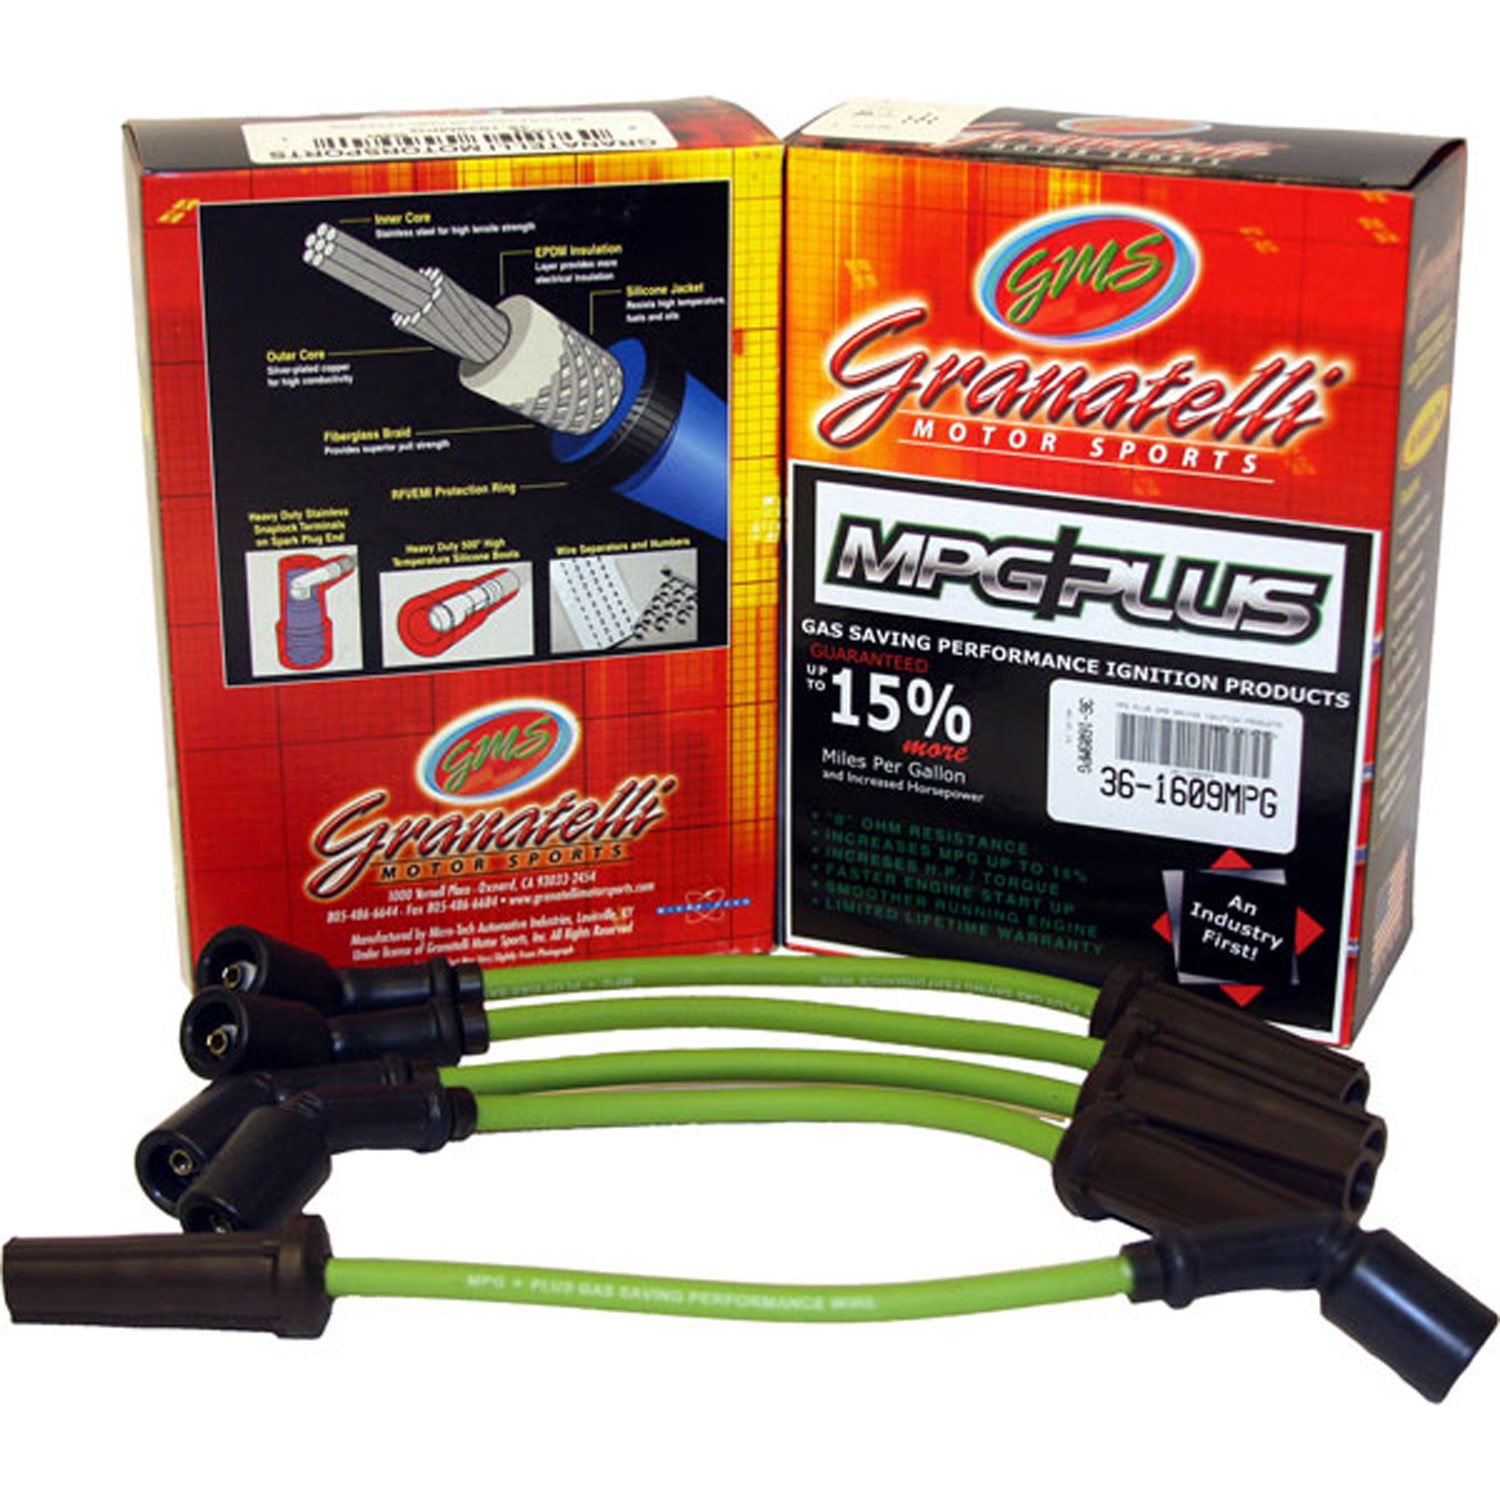 MPG Wires CHEVROLET CAVALIER 4CYL 2.2L 98-02